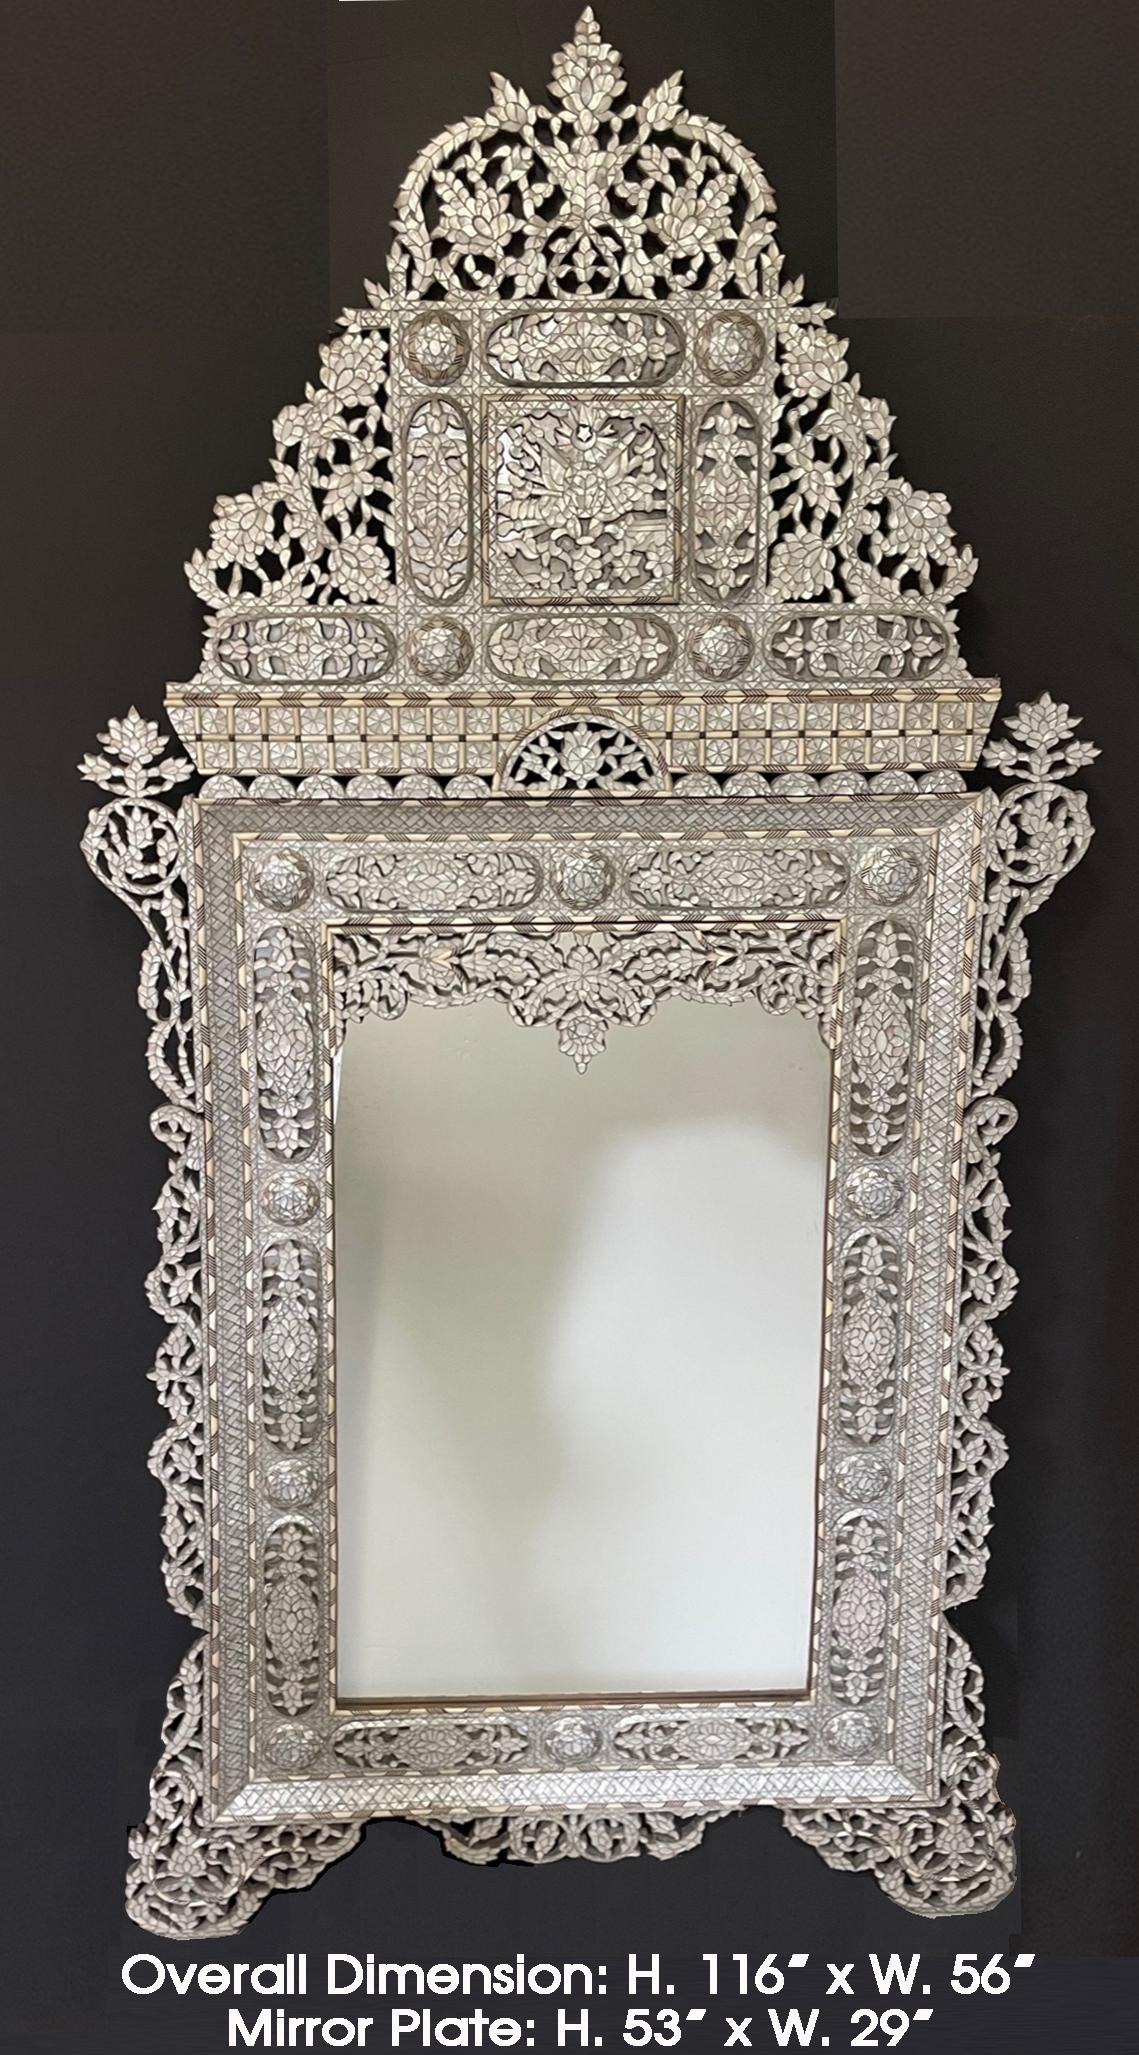 Sensational and enormous Levantine mother of pearl and pewter inlaid mirror, late 19th/early 20th century. possibly Moorish 
The elaborate arabesques solid mirror is intricately encrusted with lustrous mother of pearl with sophisticated details,